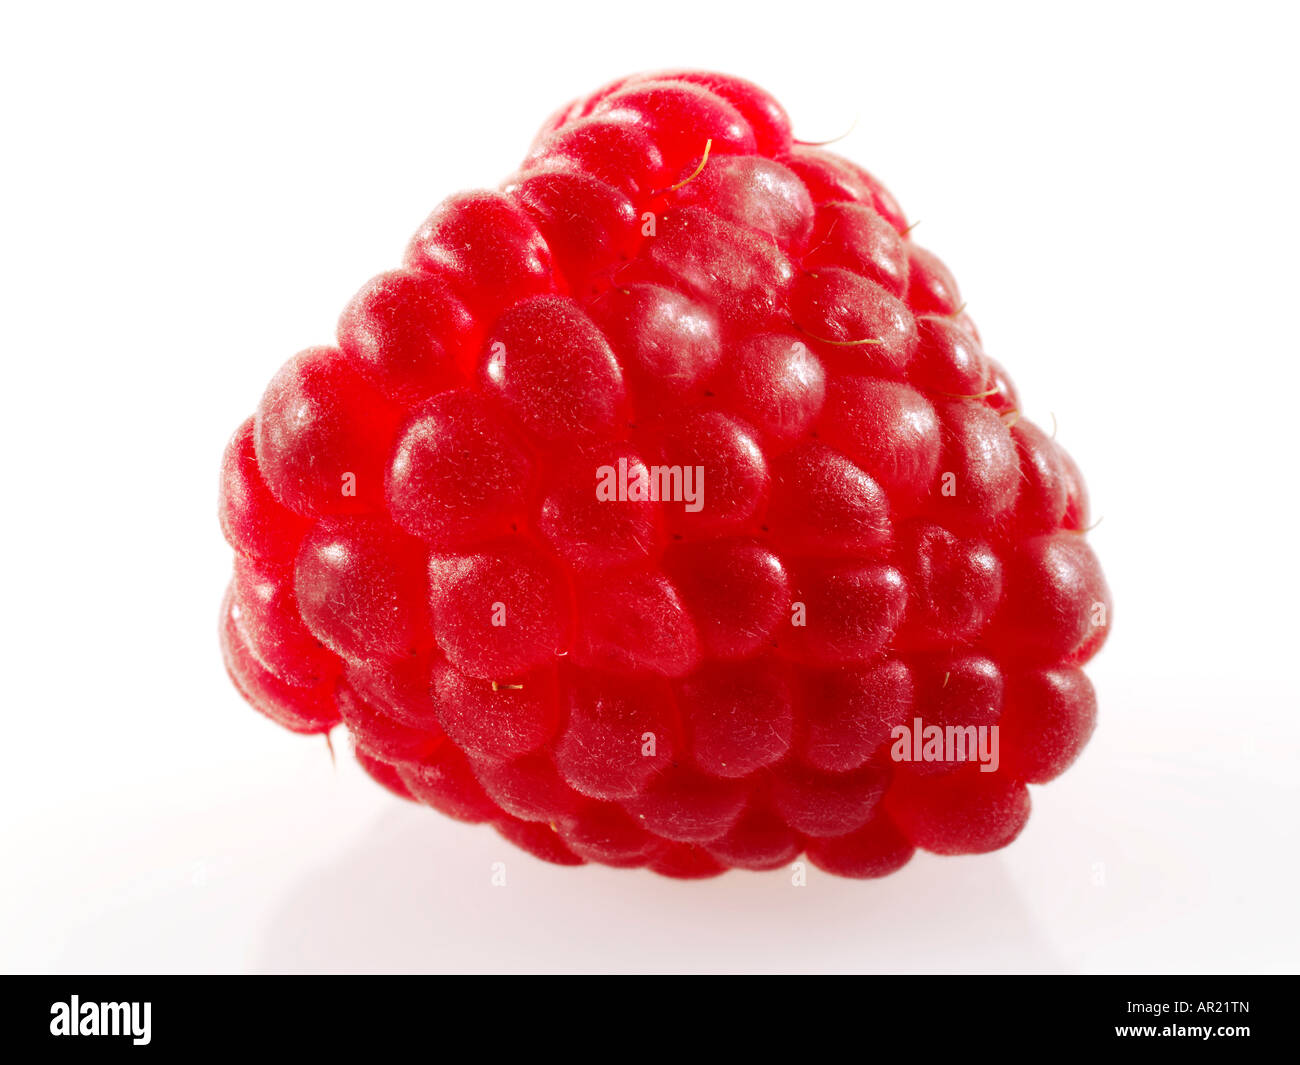 close up of a fresh whole Raspberry on a white background Stock Photo